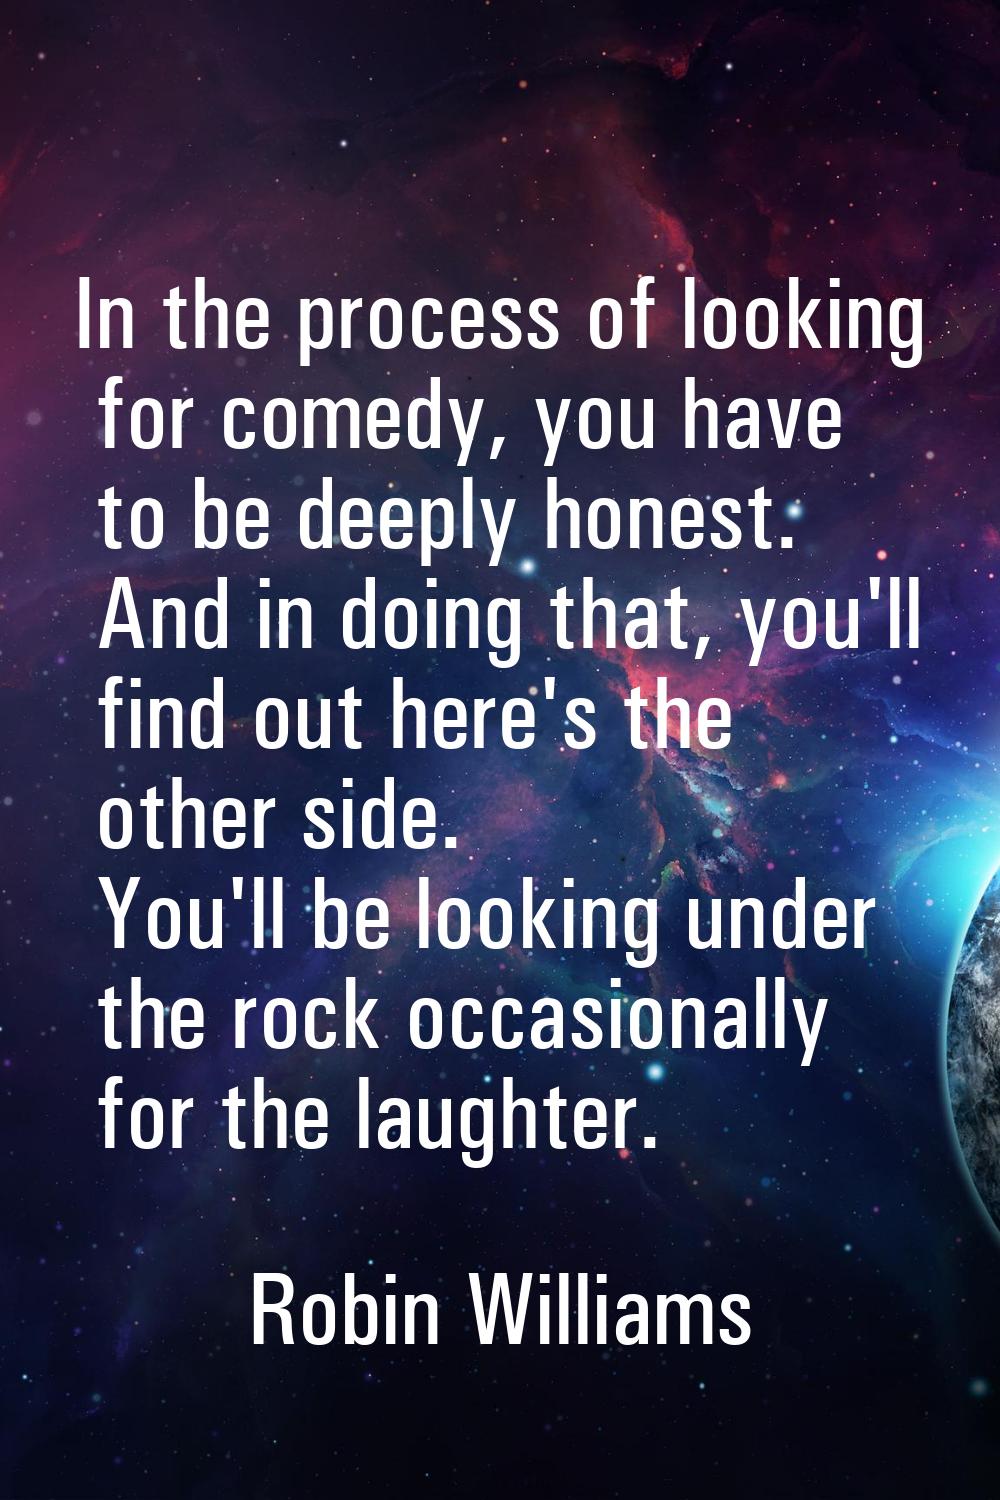 In the process of looking for comedy, you have to be deeply honest. And in doing that, you'll find 